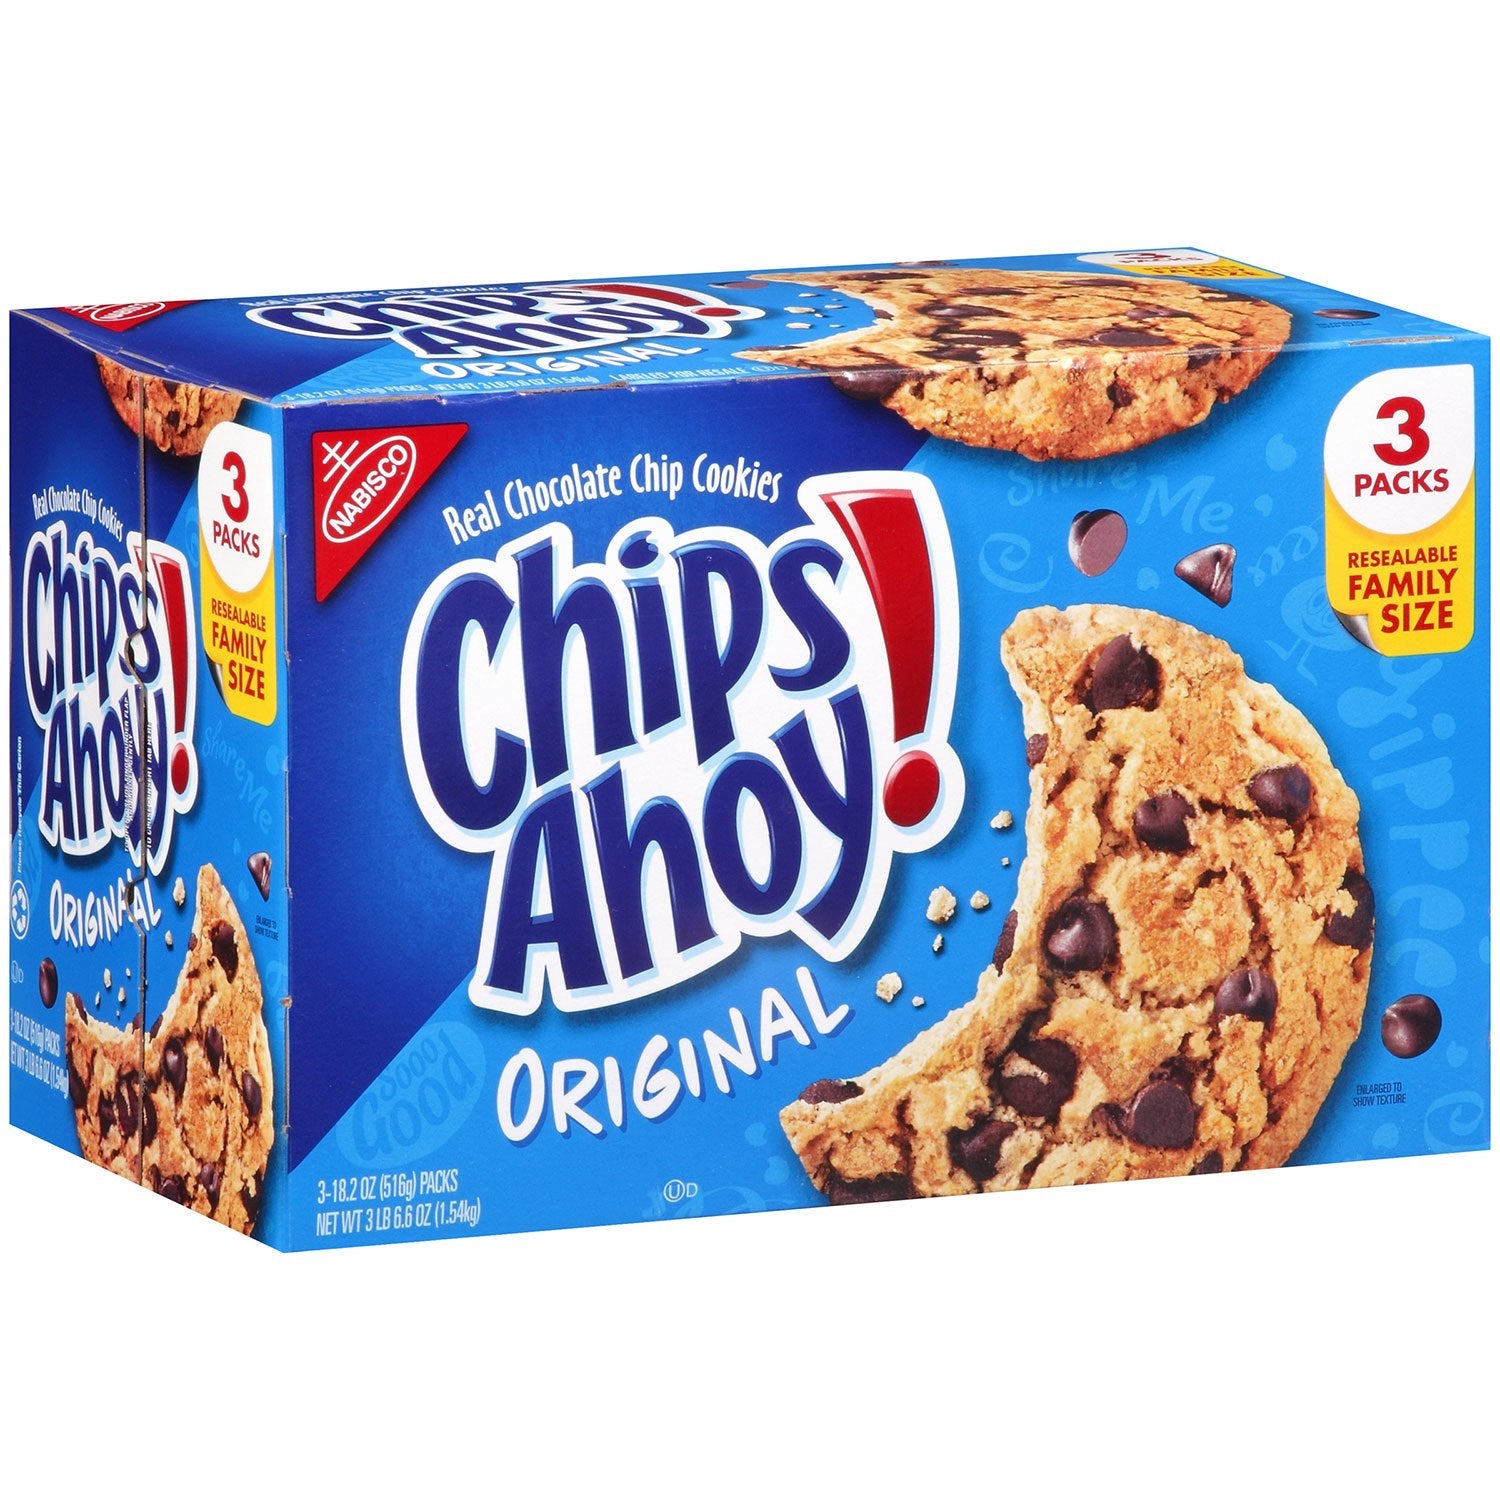 Chips Ahoy! Original Chocolate Chip Cookies, 3 Count